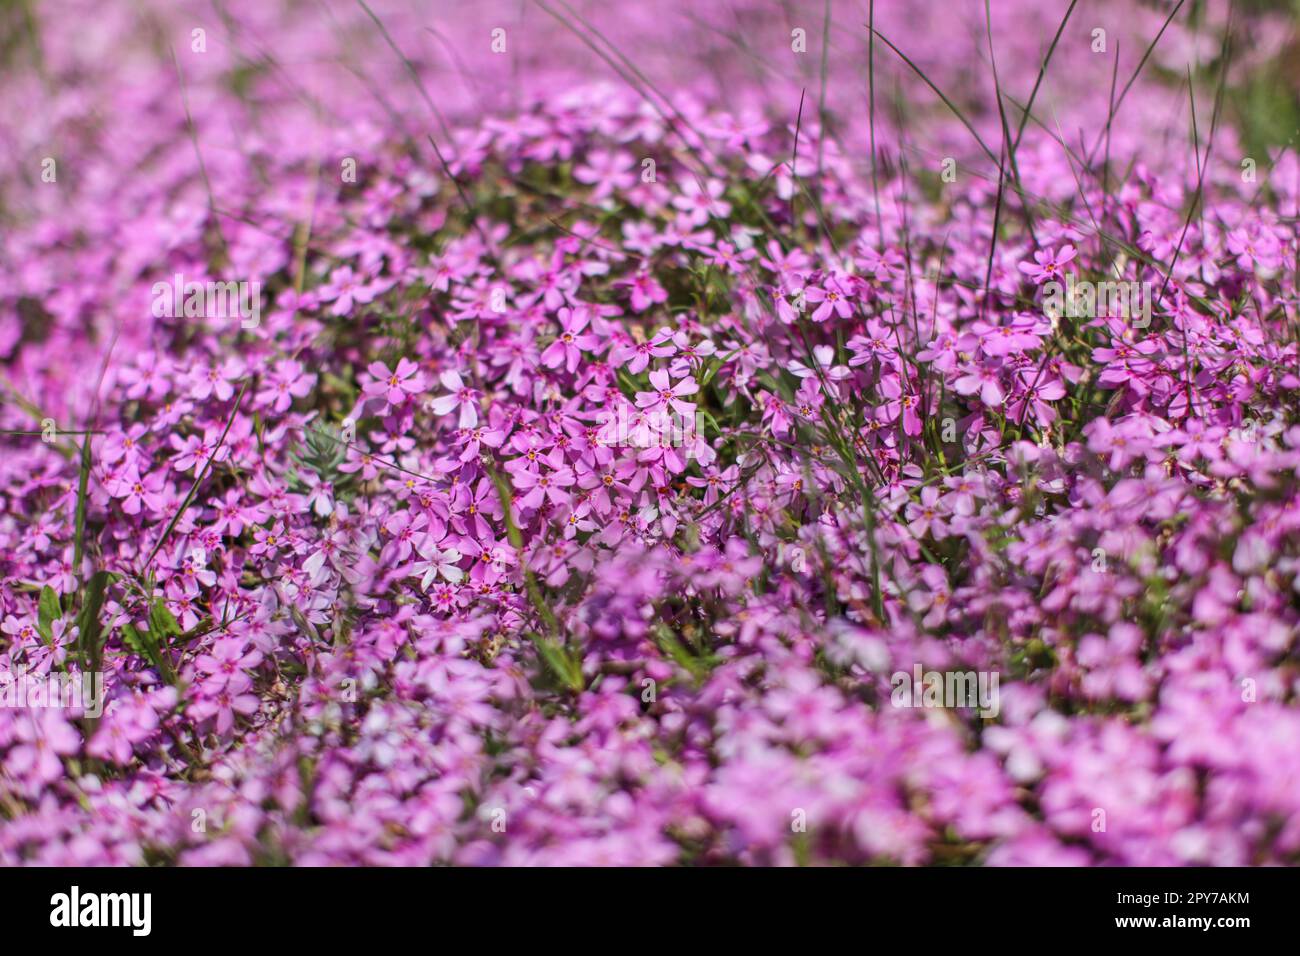 Shallow depth of field photo, only few blossoms in focus, pink / lilac flowerbed. Abstract flowery spring background. Stock Photo